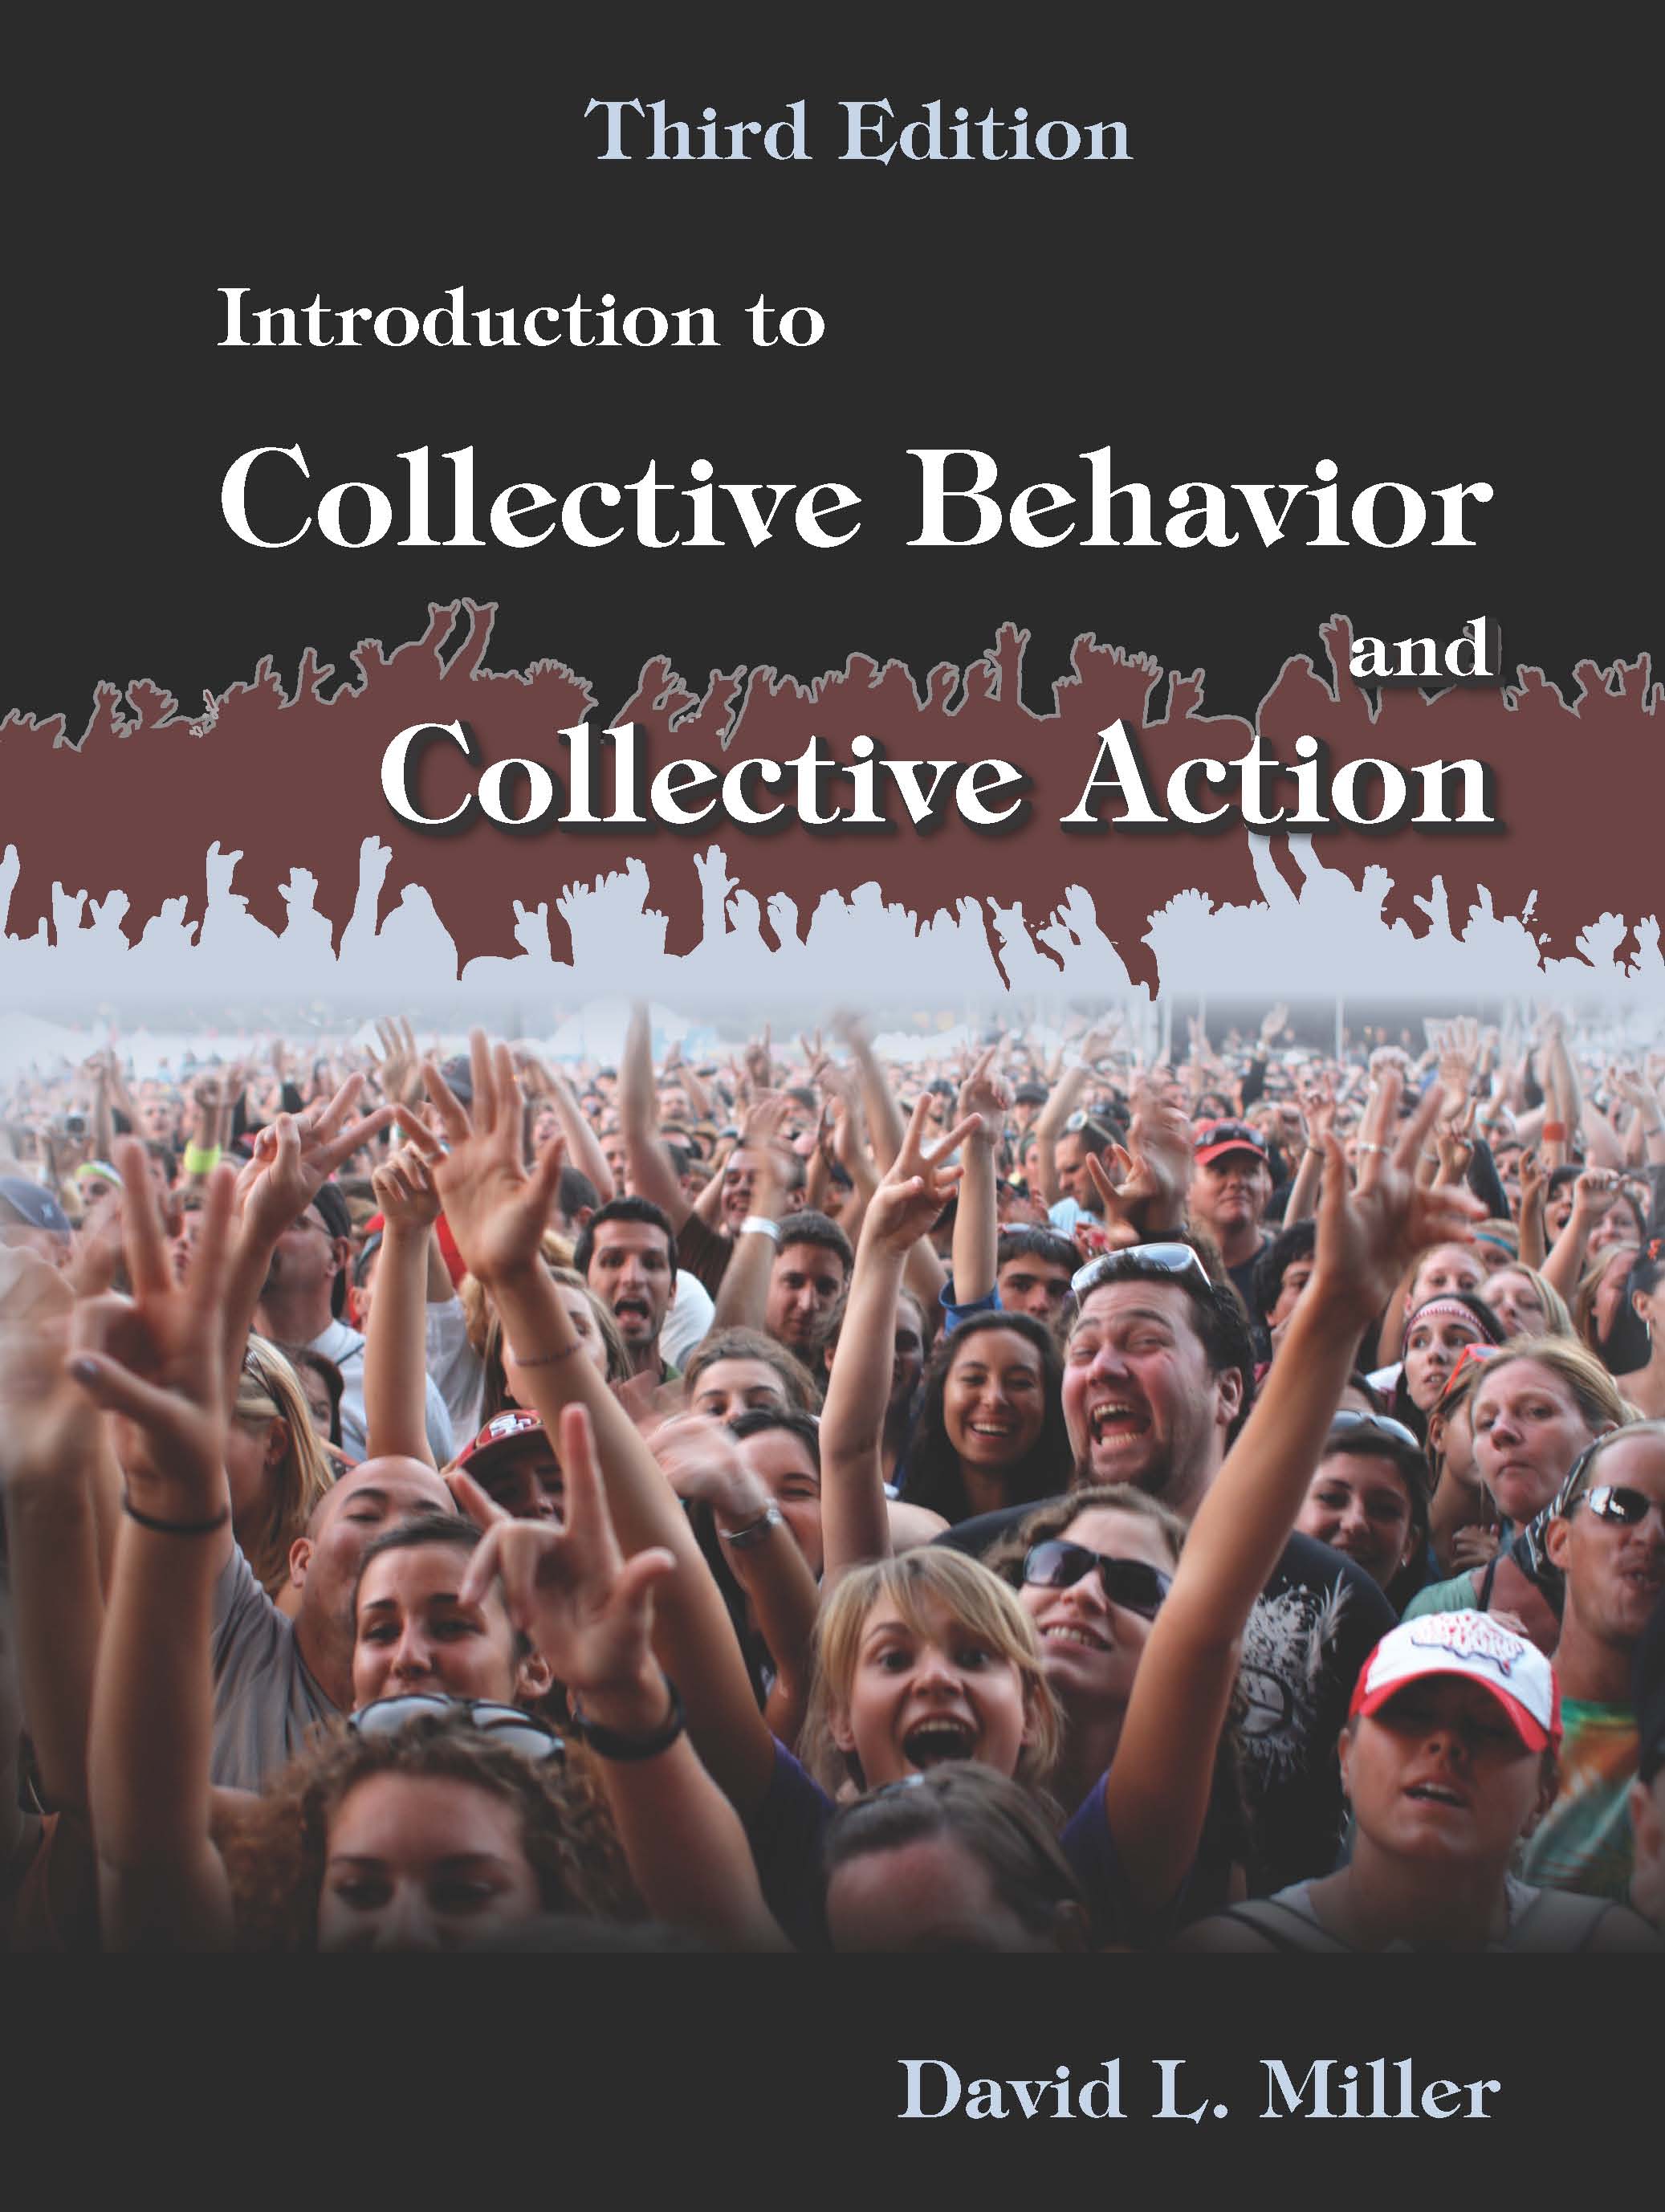 Introduction to Collective Behavior and Collective Action: Third Edition by David L. Miller